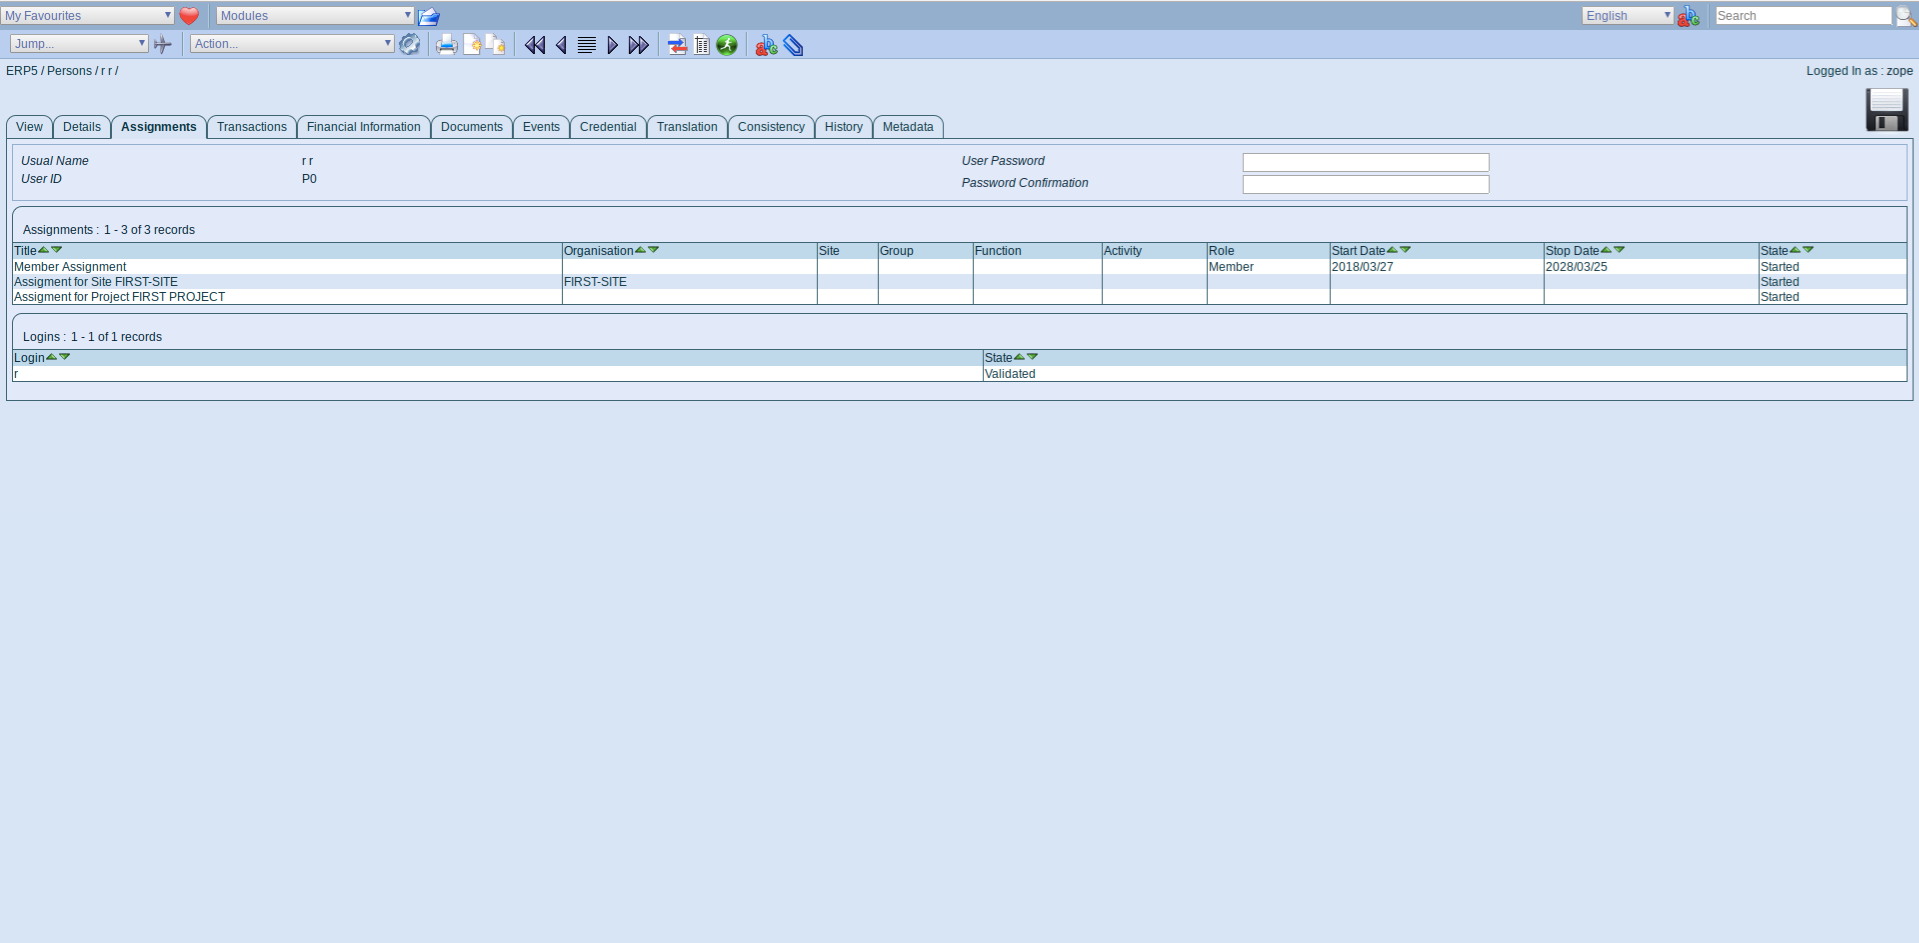 ERP5 Interface - Assignments Tab